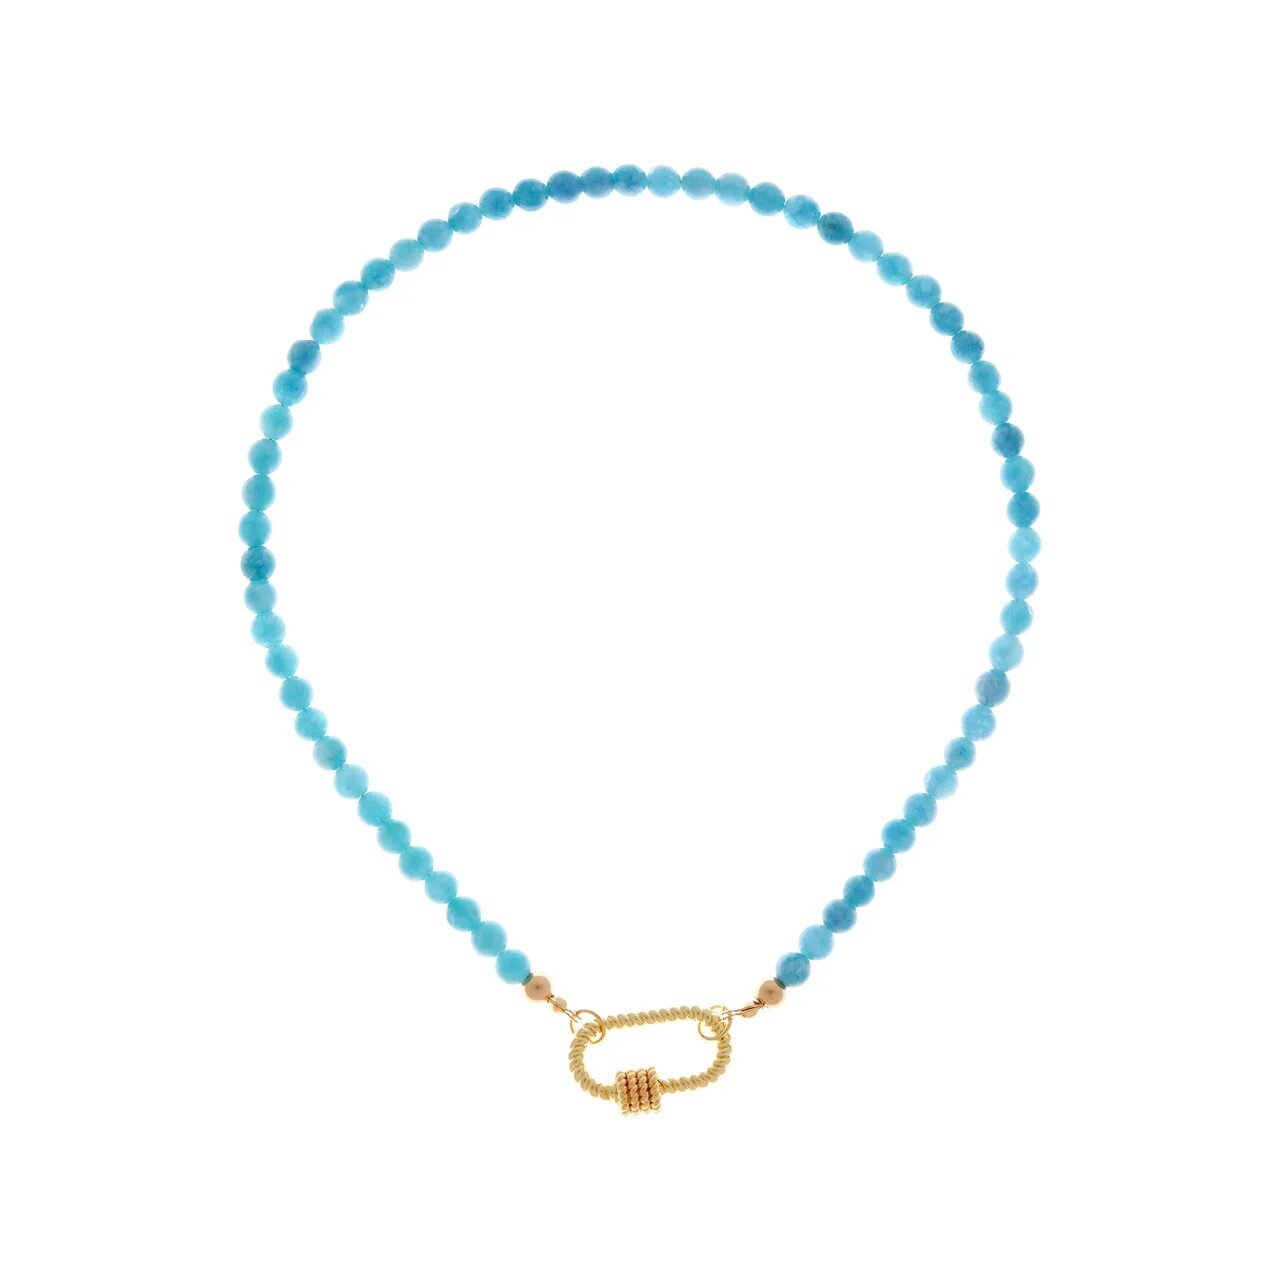 HOLLY JUNE Колье Carabiner Gold Turquoise Necklace цена и фото